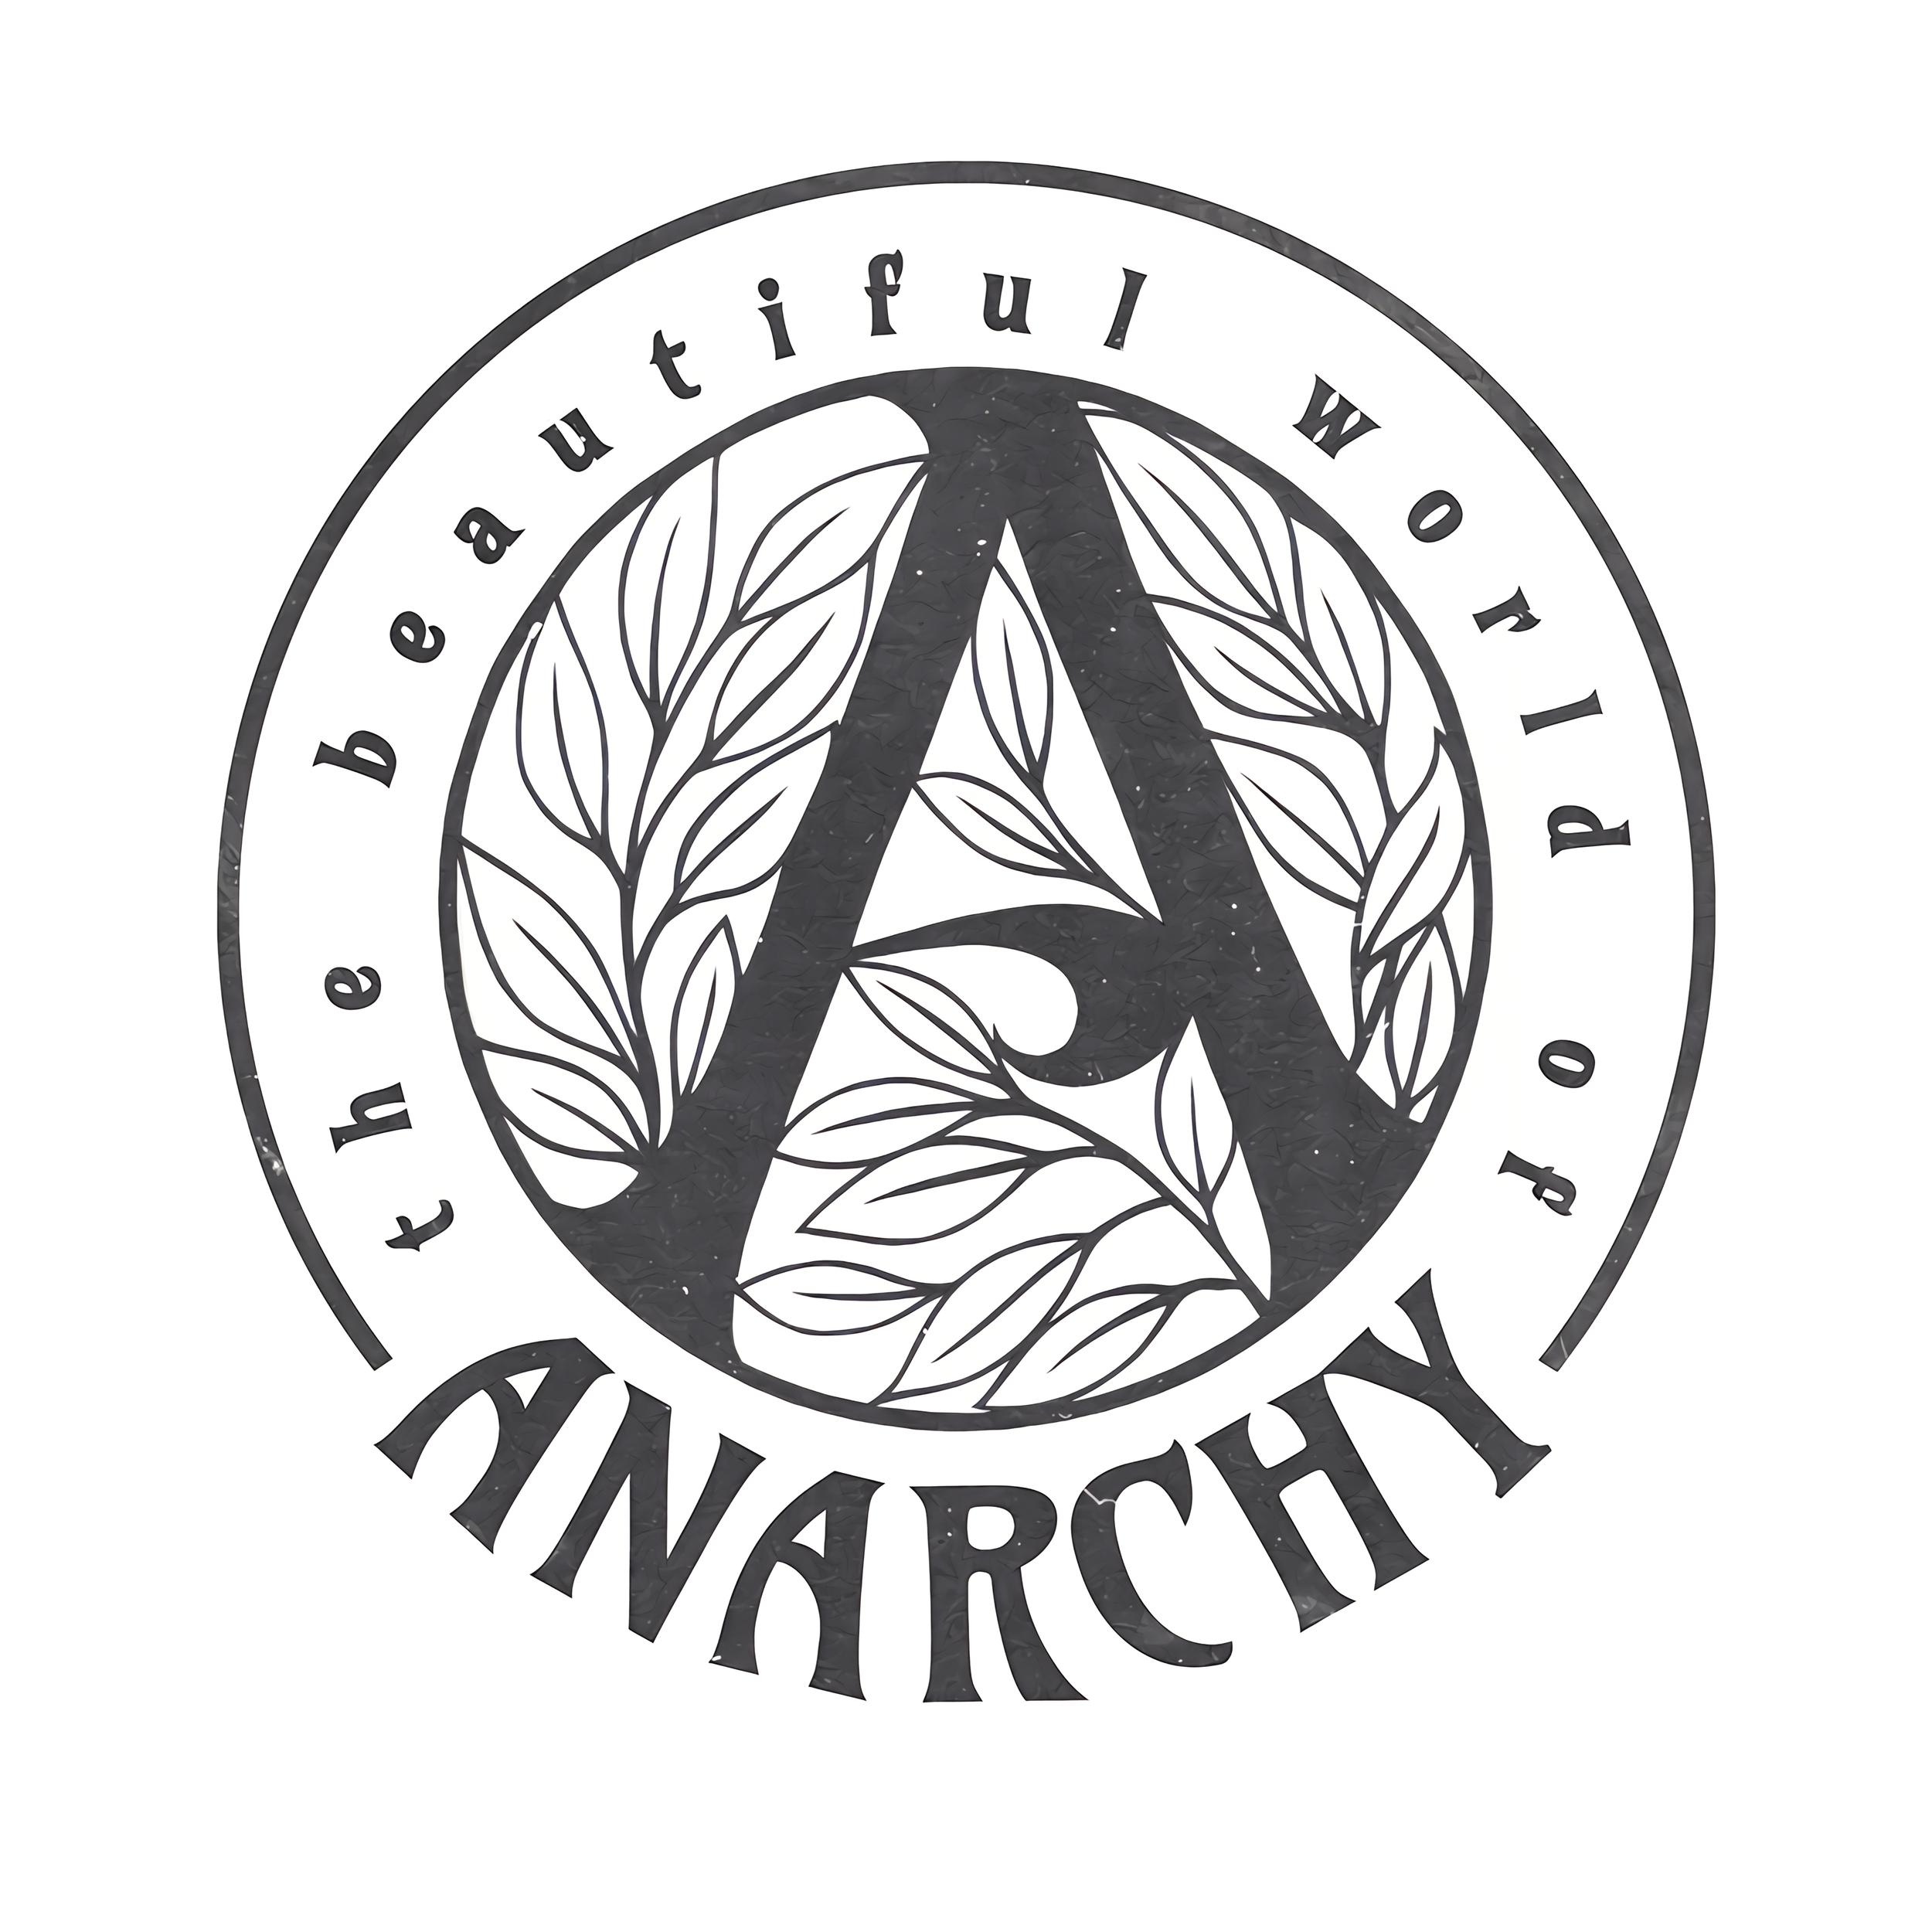 The beautiful world of anarchy